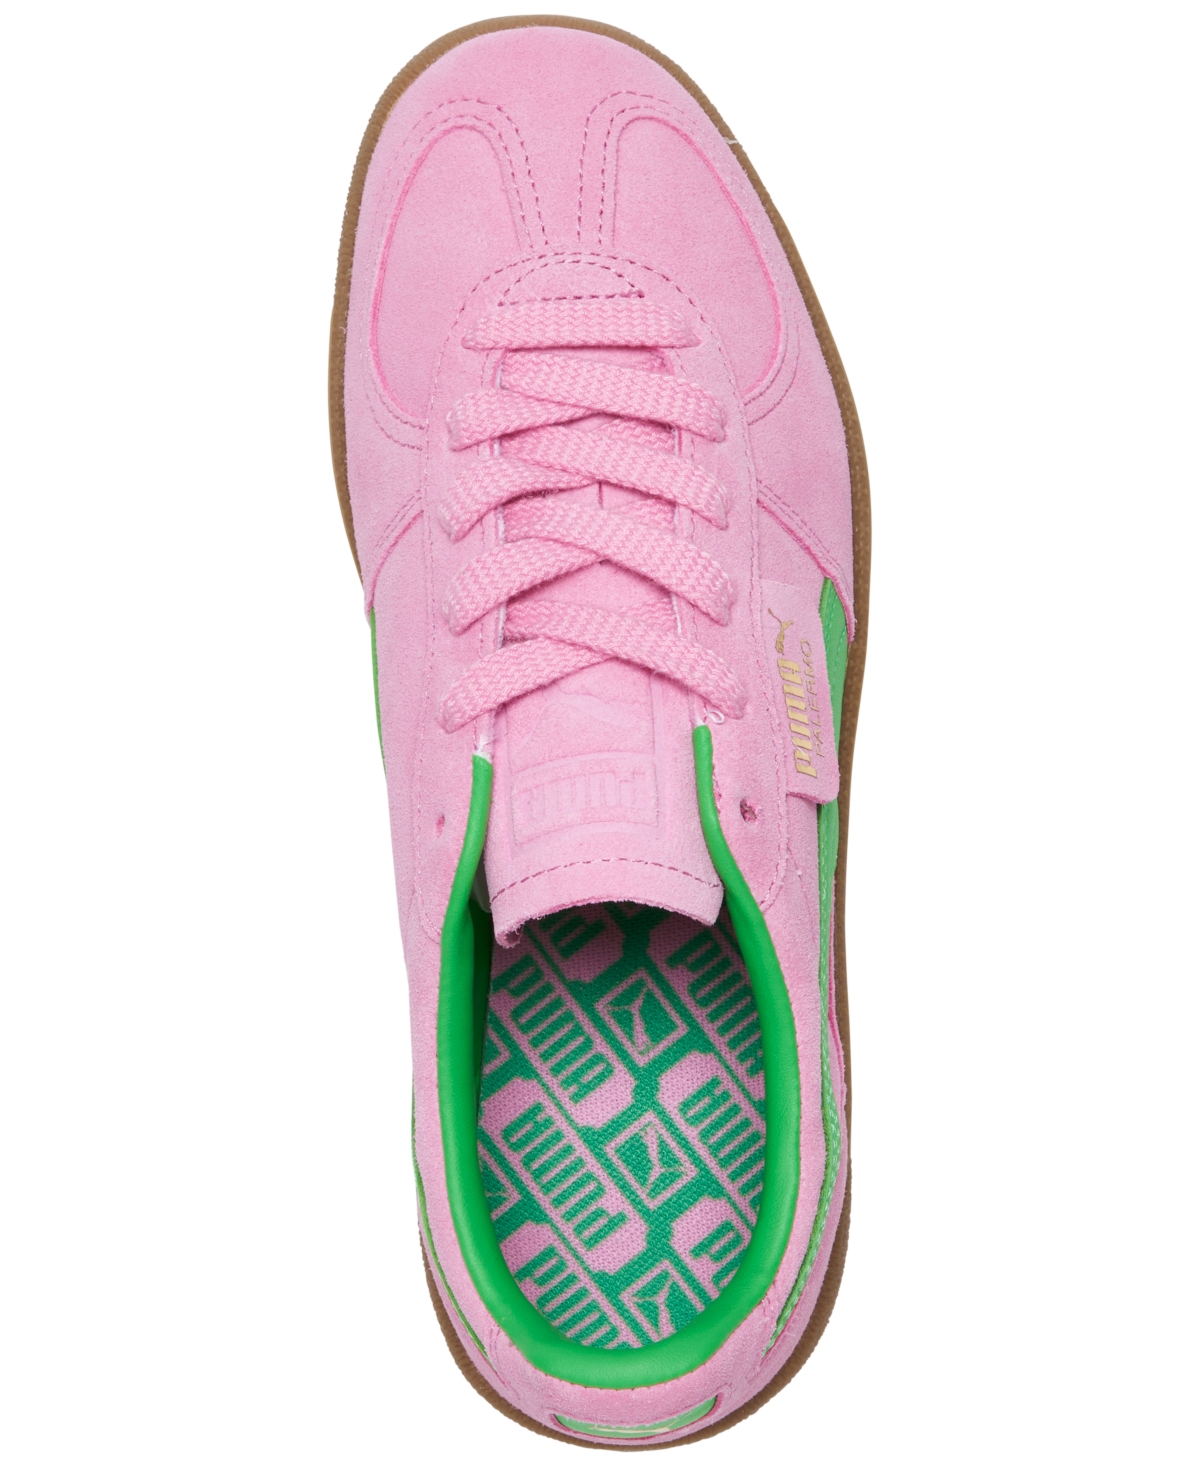 Shop Puma Women's Palermo Special Casual Sneakers From Finish Line In Pink Delight, Green